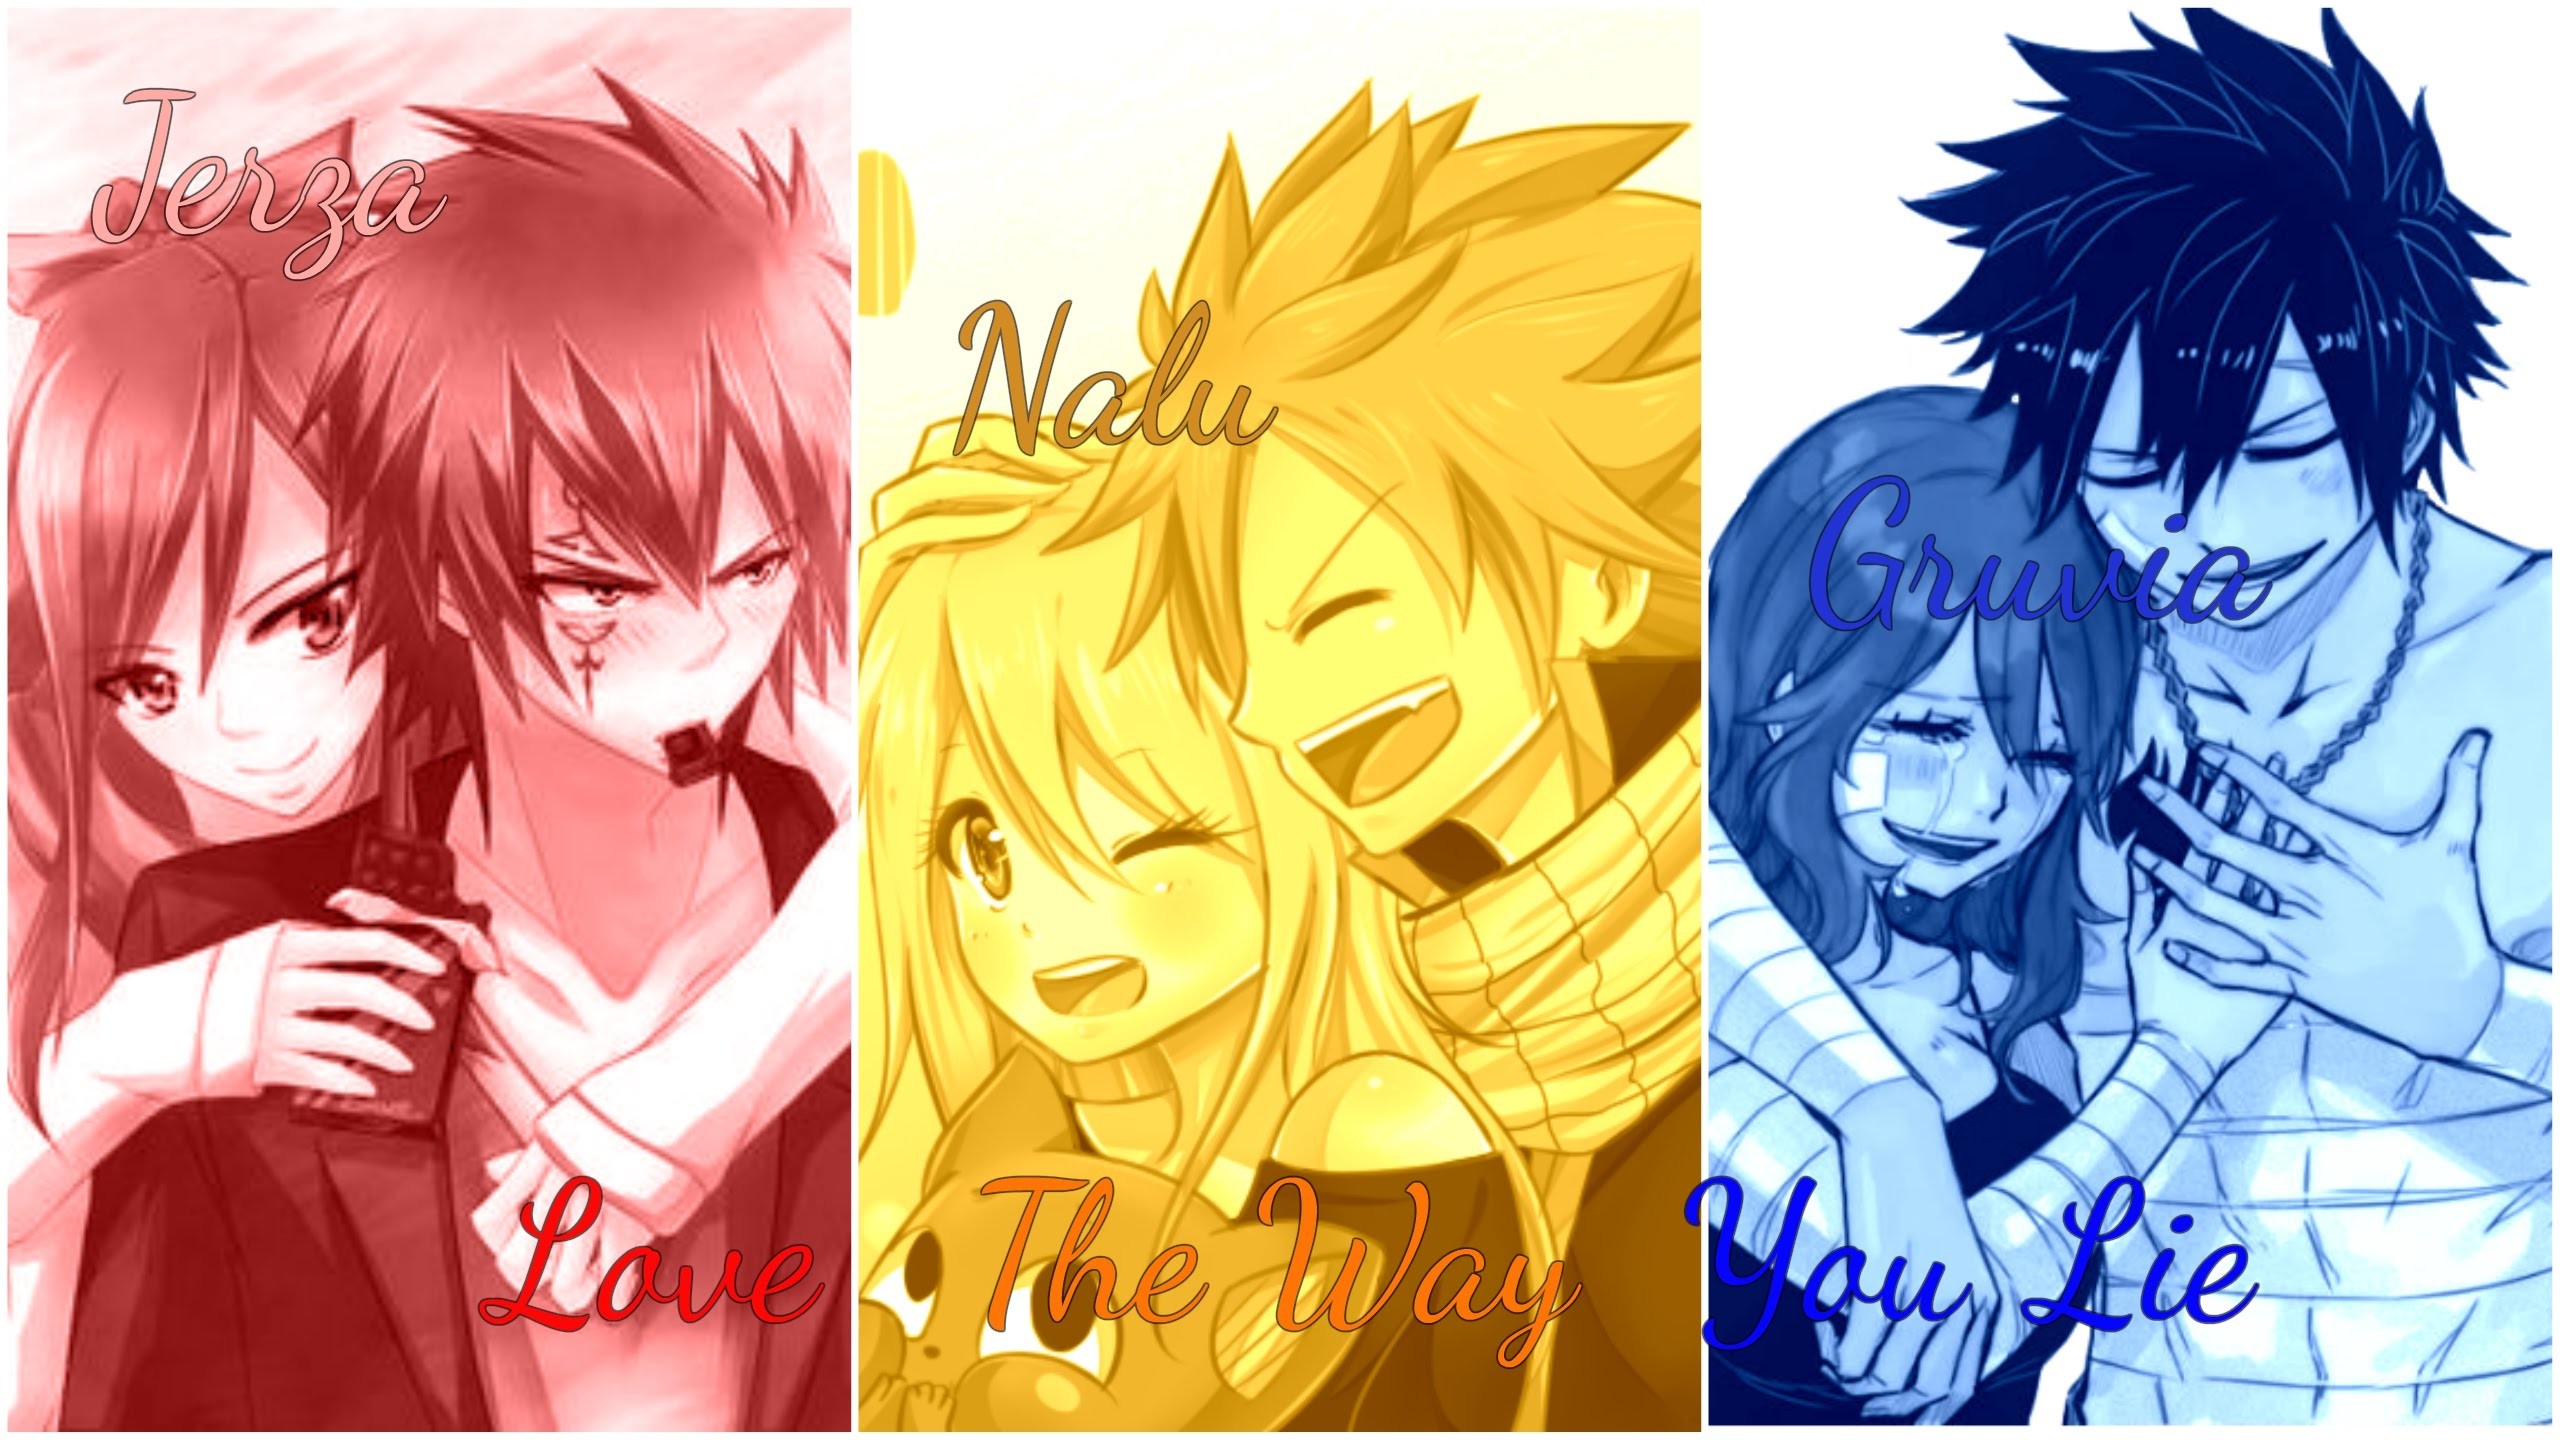 2560x1440 ... I love you, Lucy -Fairy Tail 317- by GumberryPanda on DeviantArt ...